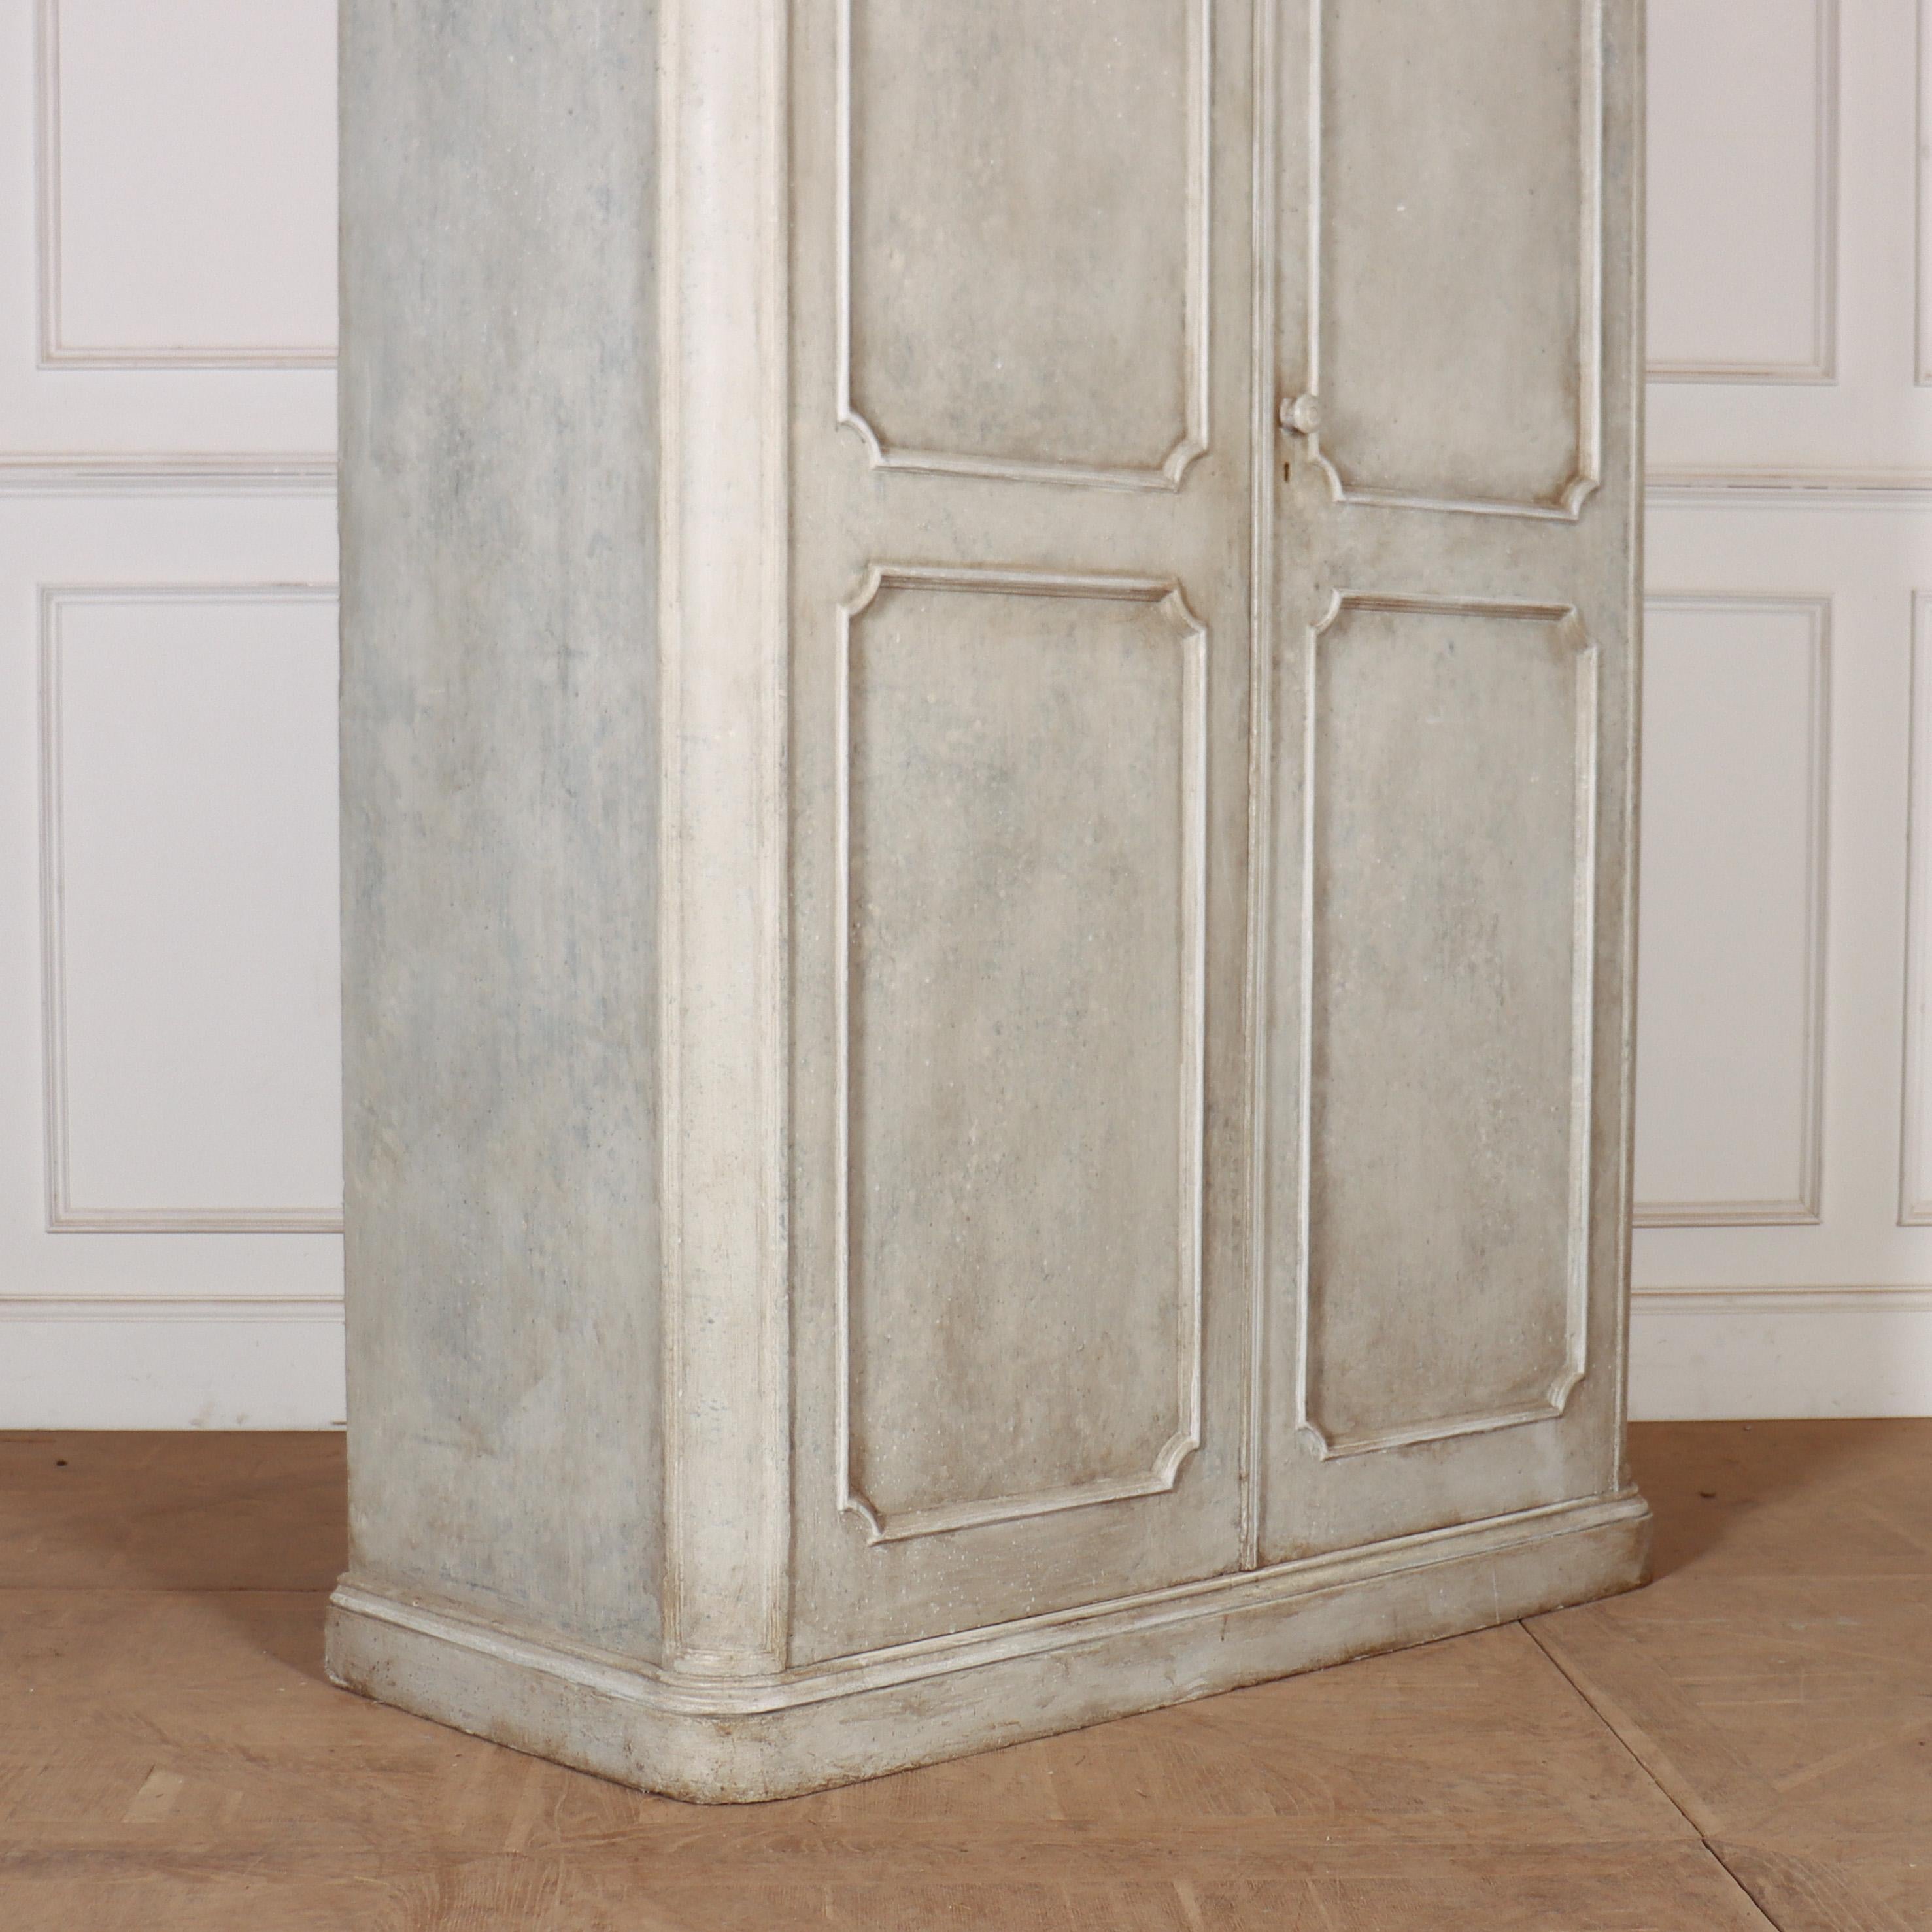 William IV English Painted Linen Cupboard